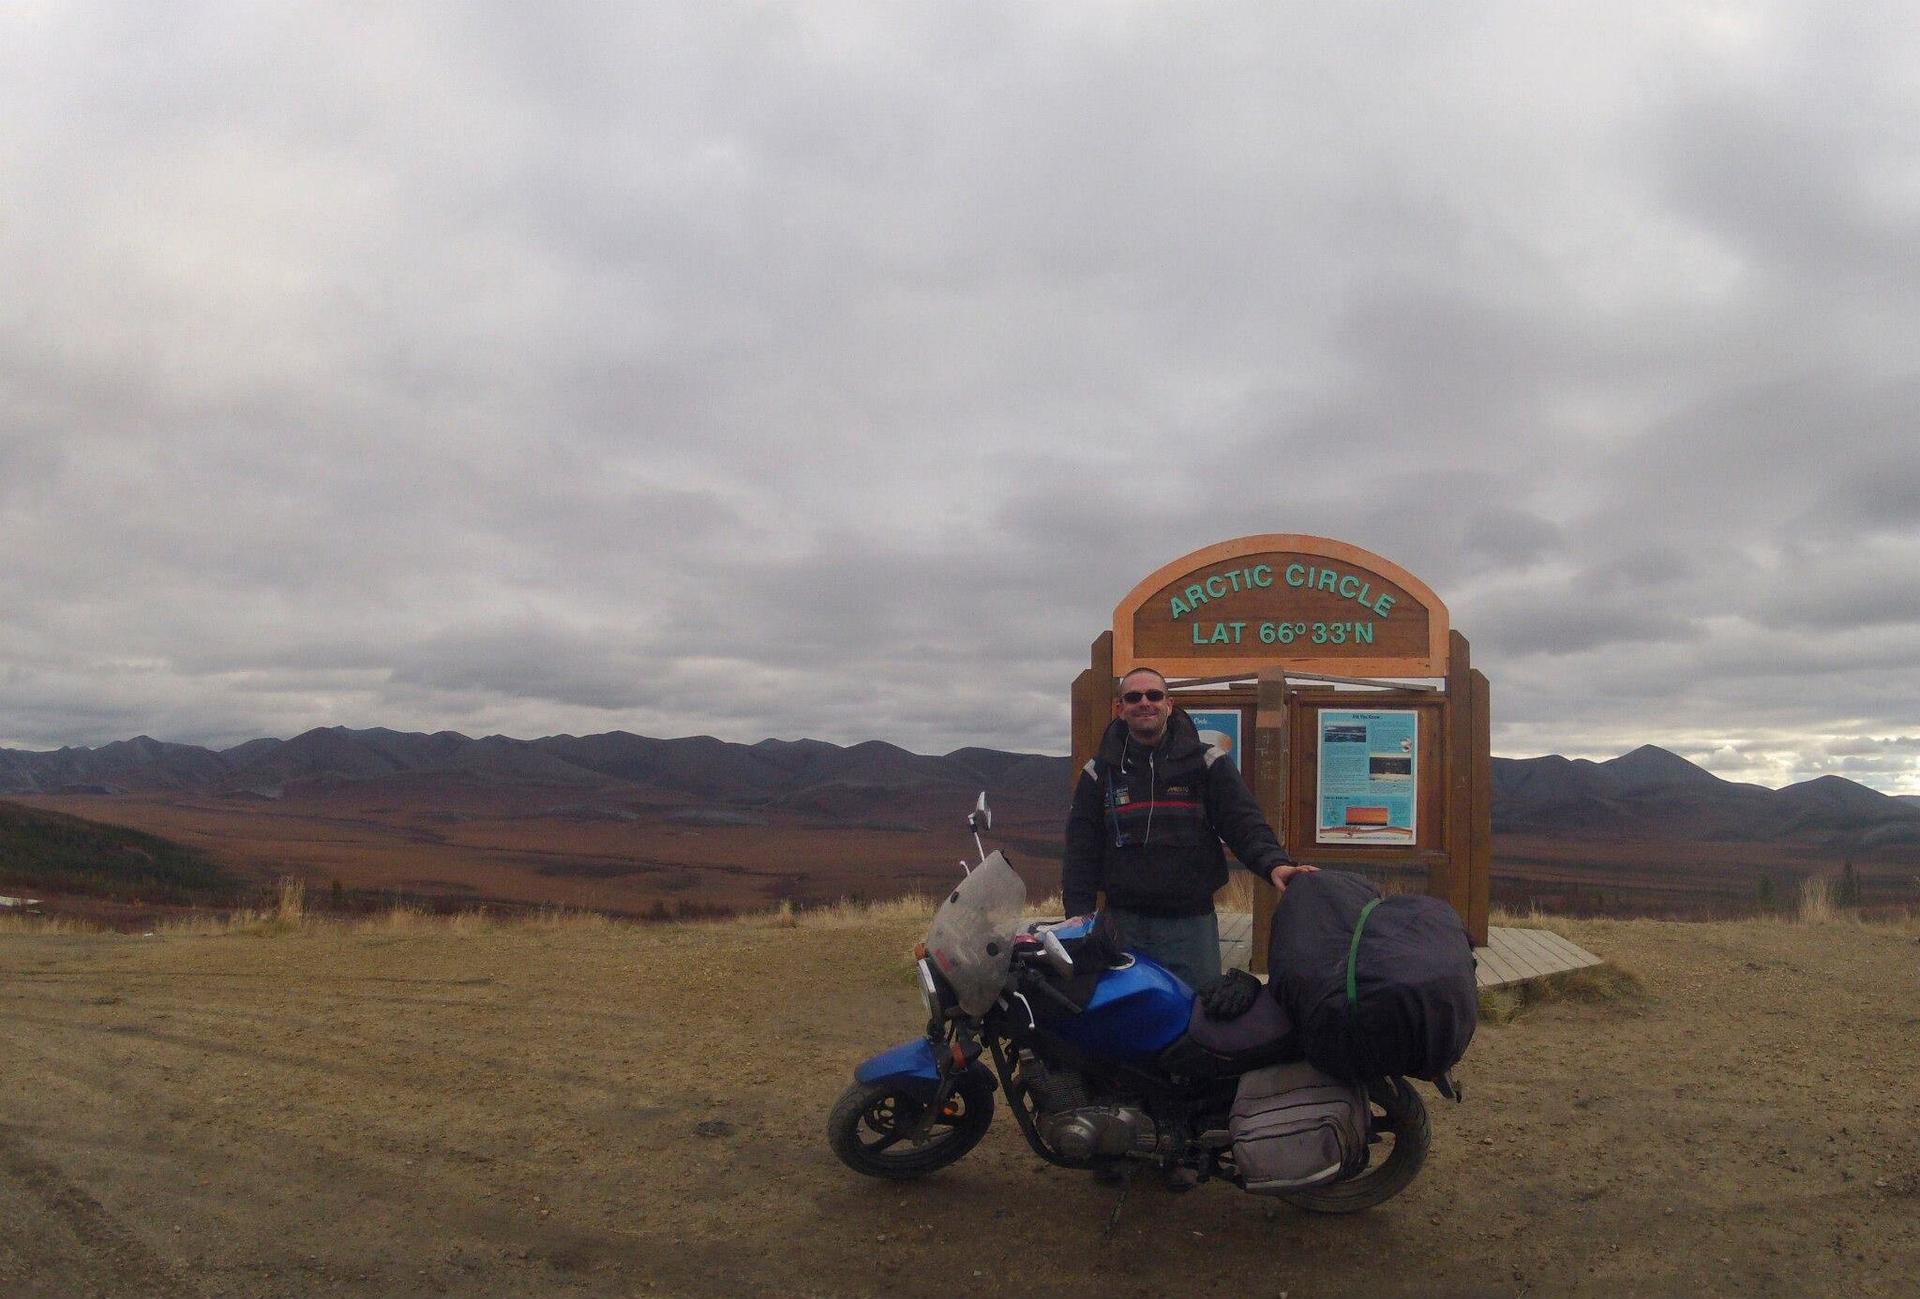 Me and my motorcycle at the arctic circle in the North West Territories, Canada